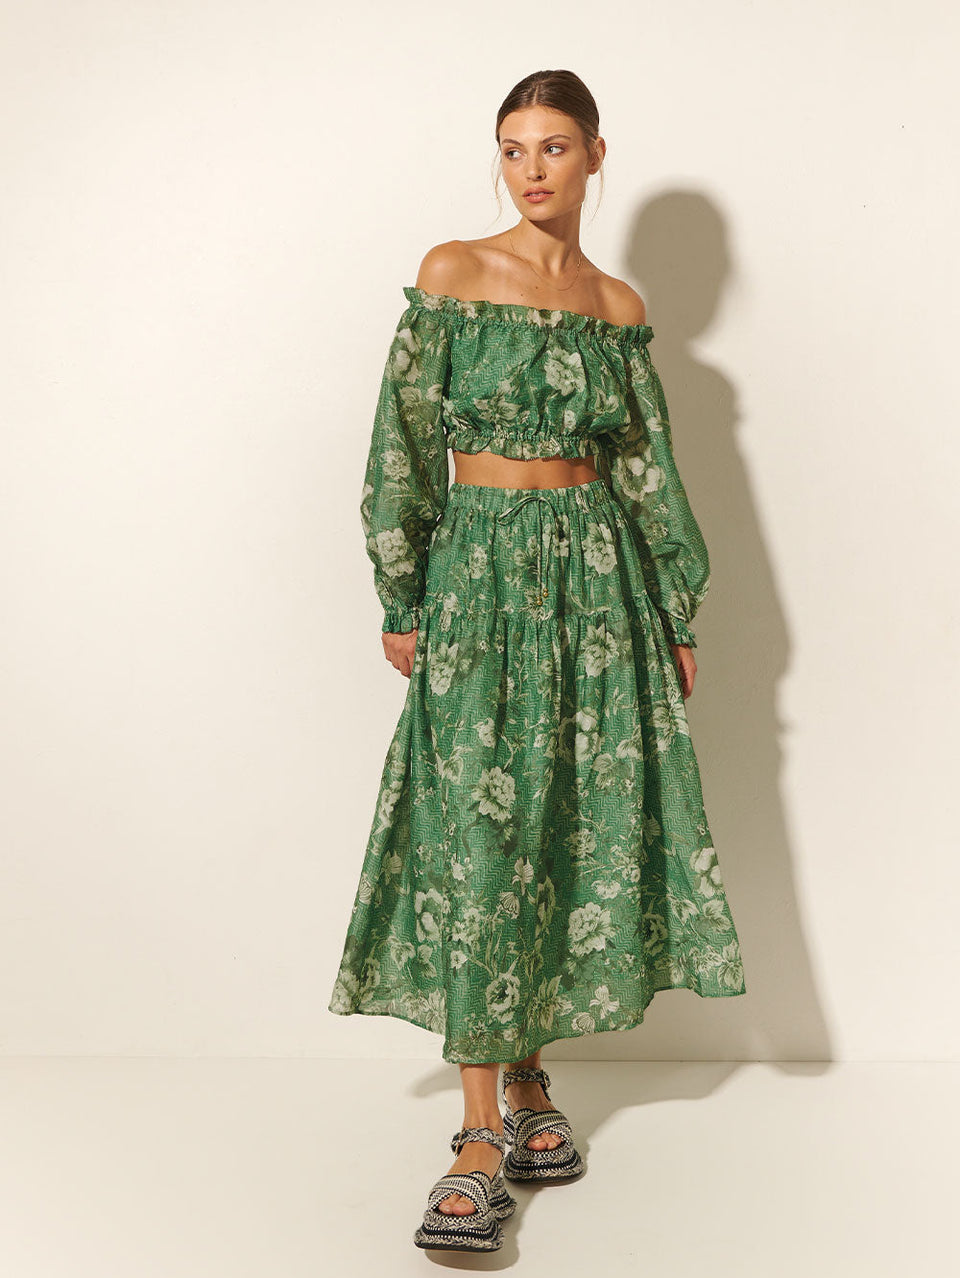 Studio model wears KIVARI Khalo Midi Skirt: A green floral midi skirt featuring an elasticated drawstring waist with gold bead ends and a gathered tiered skirt.